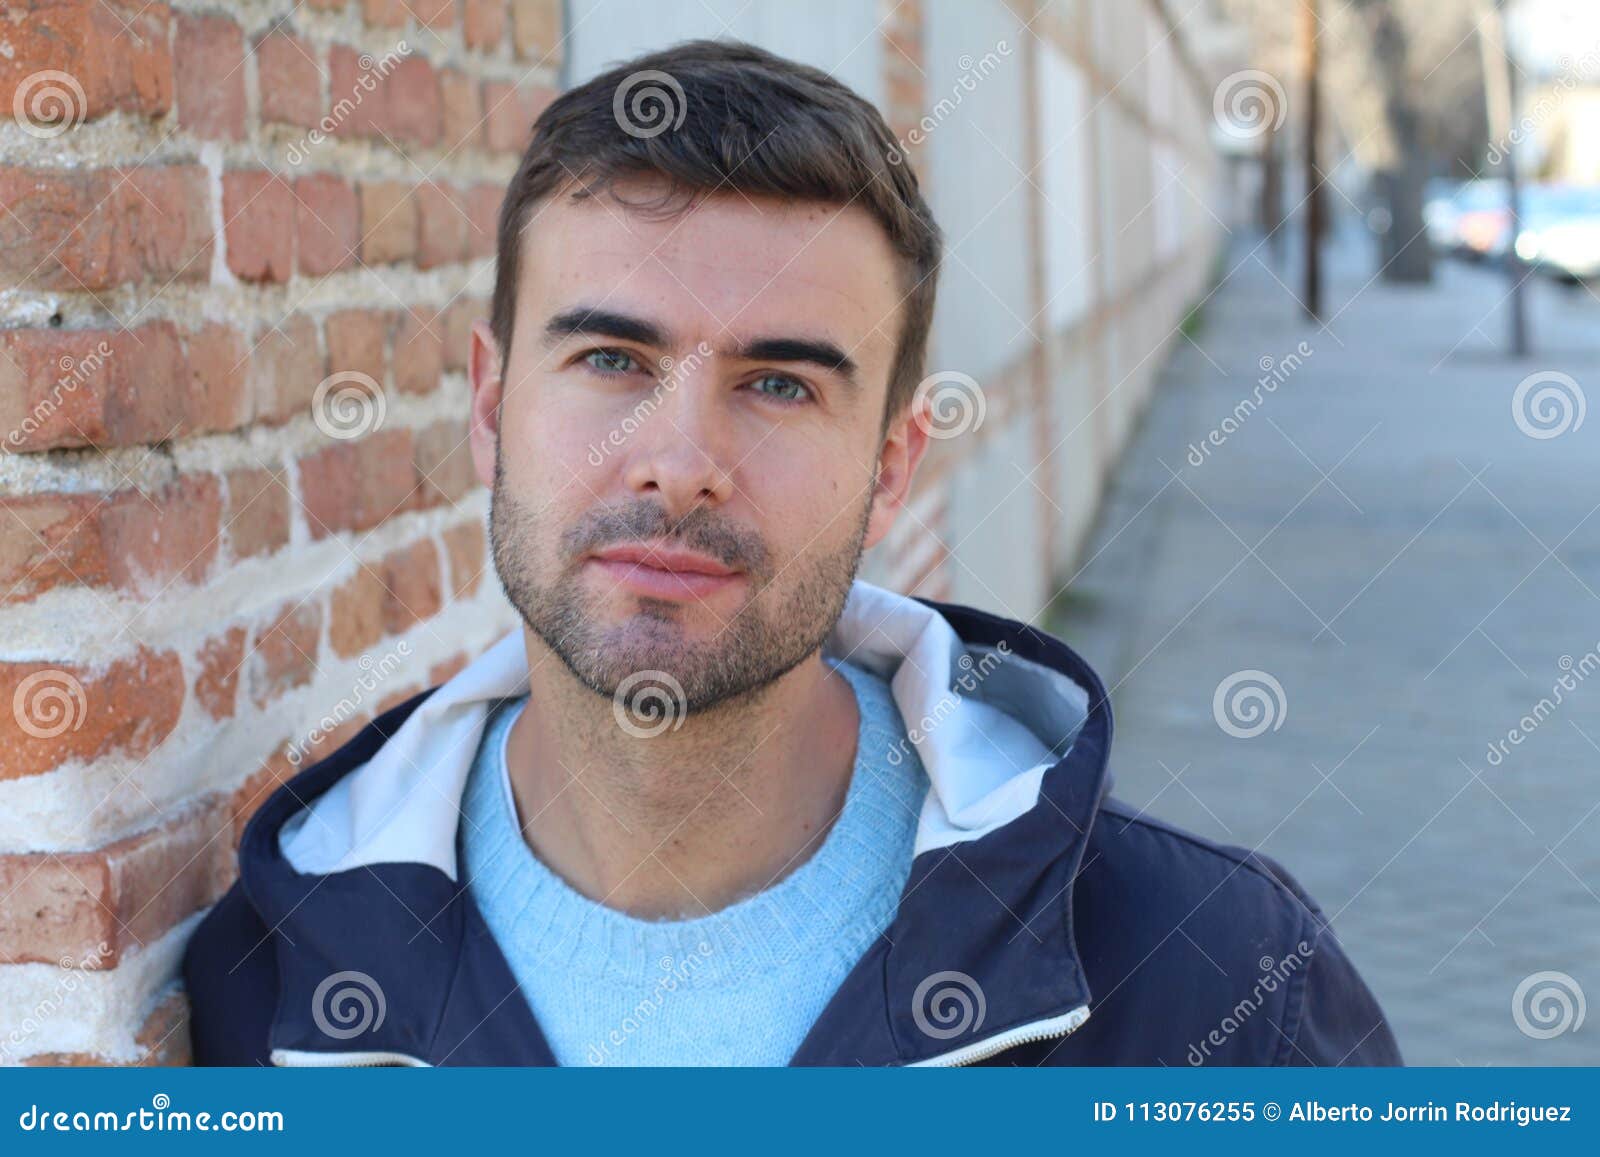 Blue-eyed male with hairy chest - wide 3